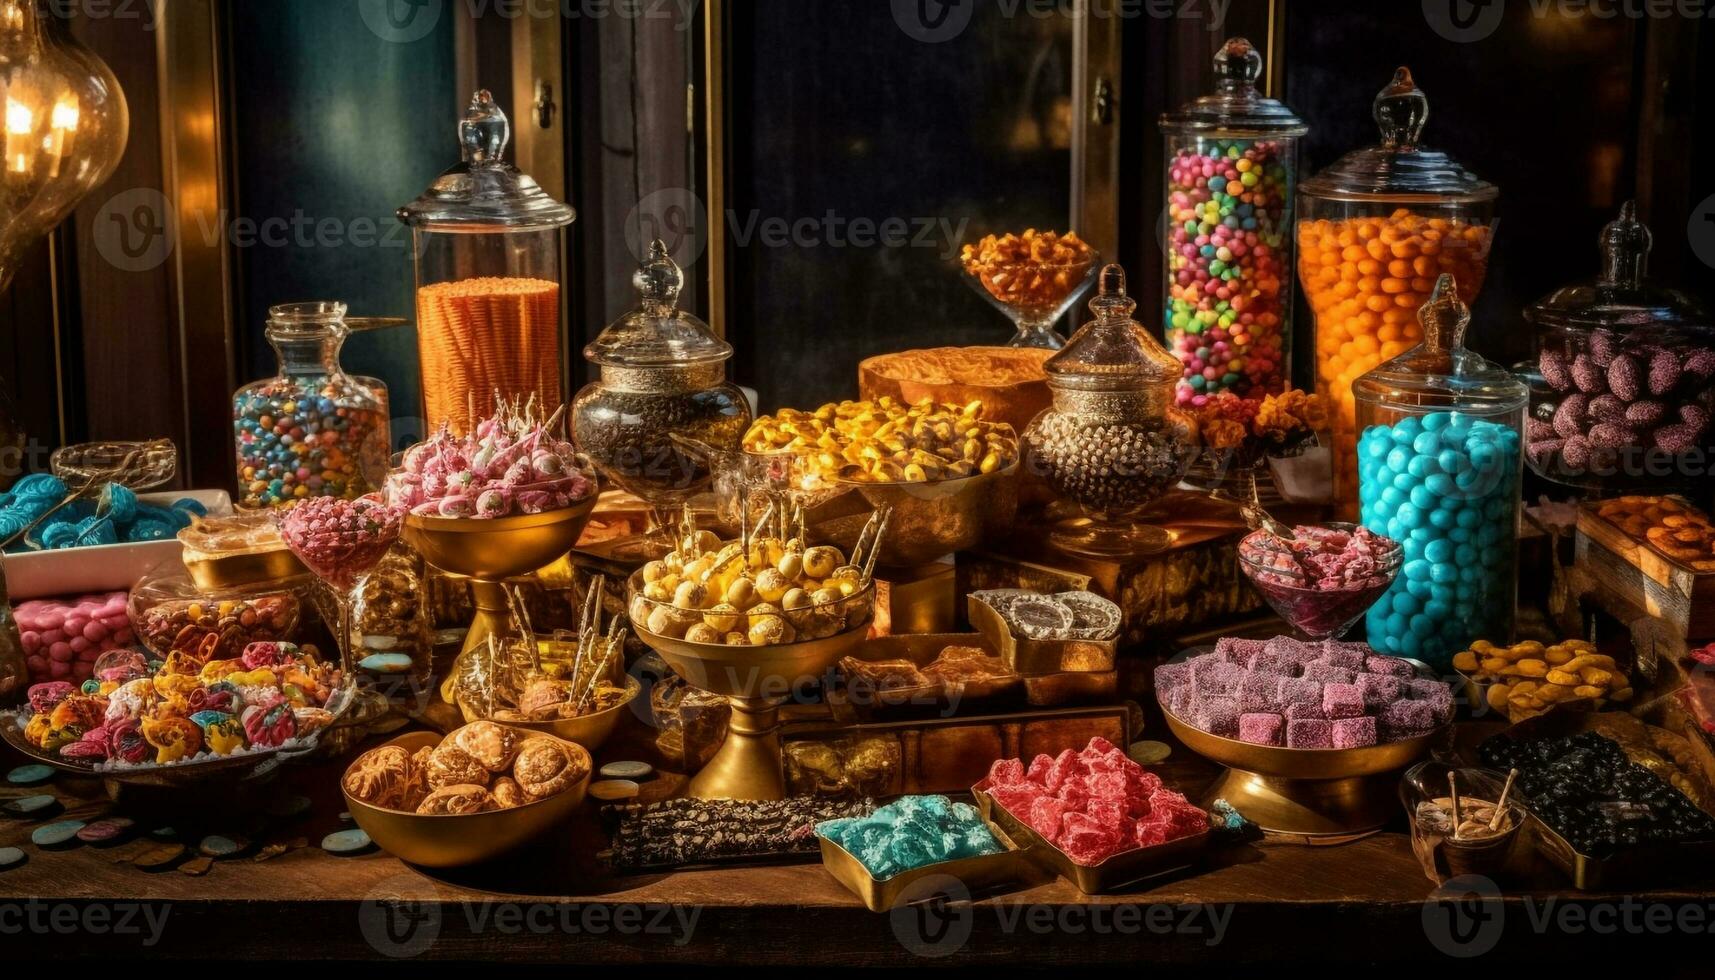 Abundance of sweet food, spices, and souvenirs generated by AI photo